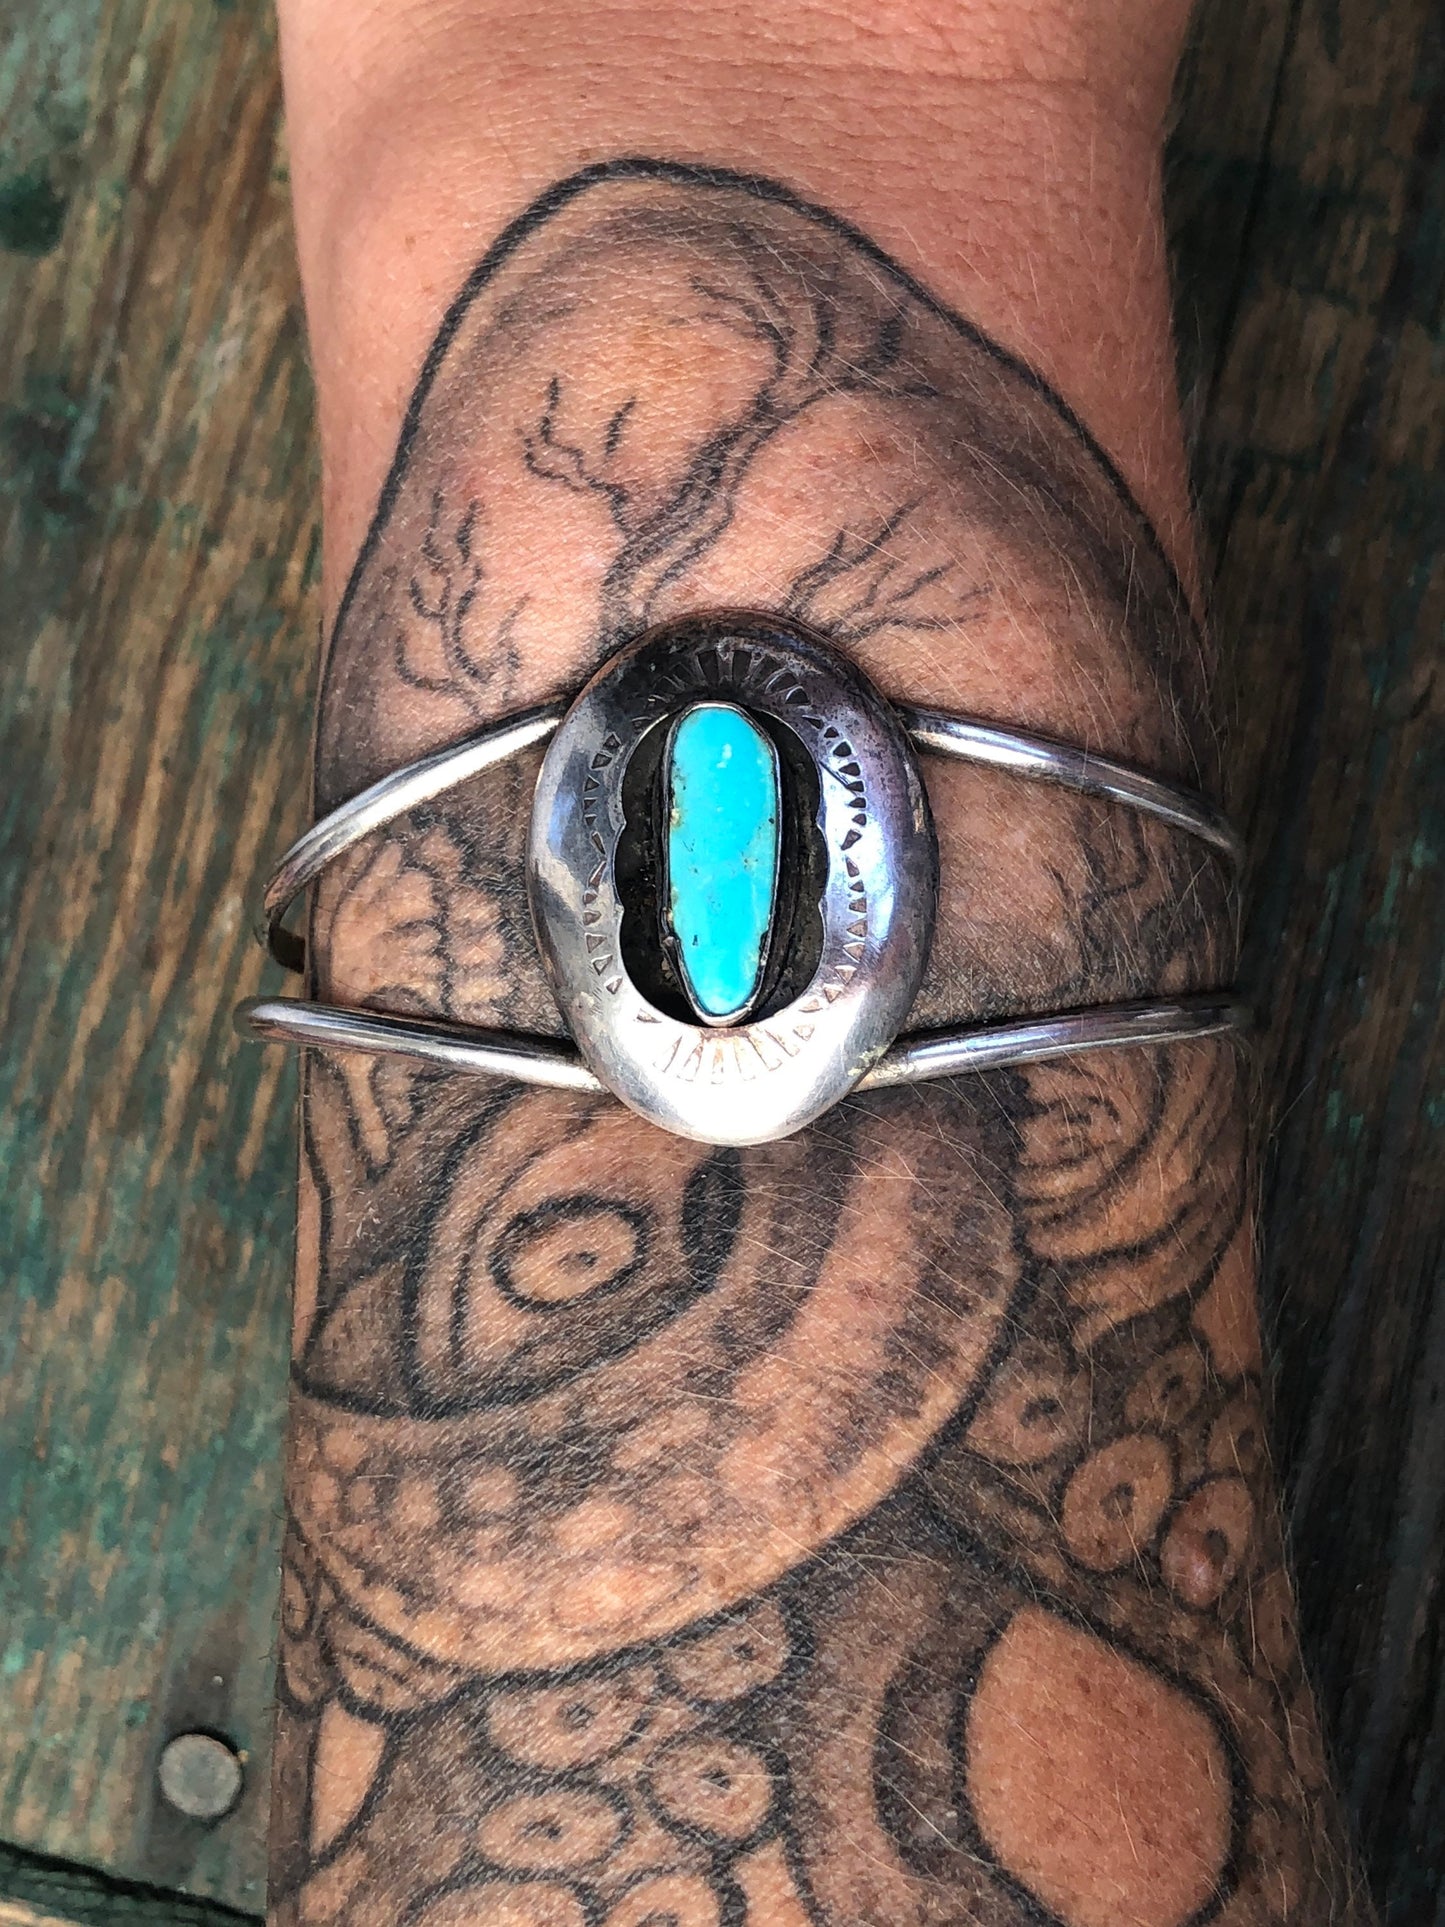 Vintage Native American Navajo Shadowbox Elongated Turquoise Sterling Silver Cuff Bracelet